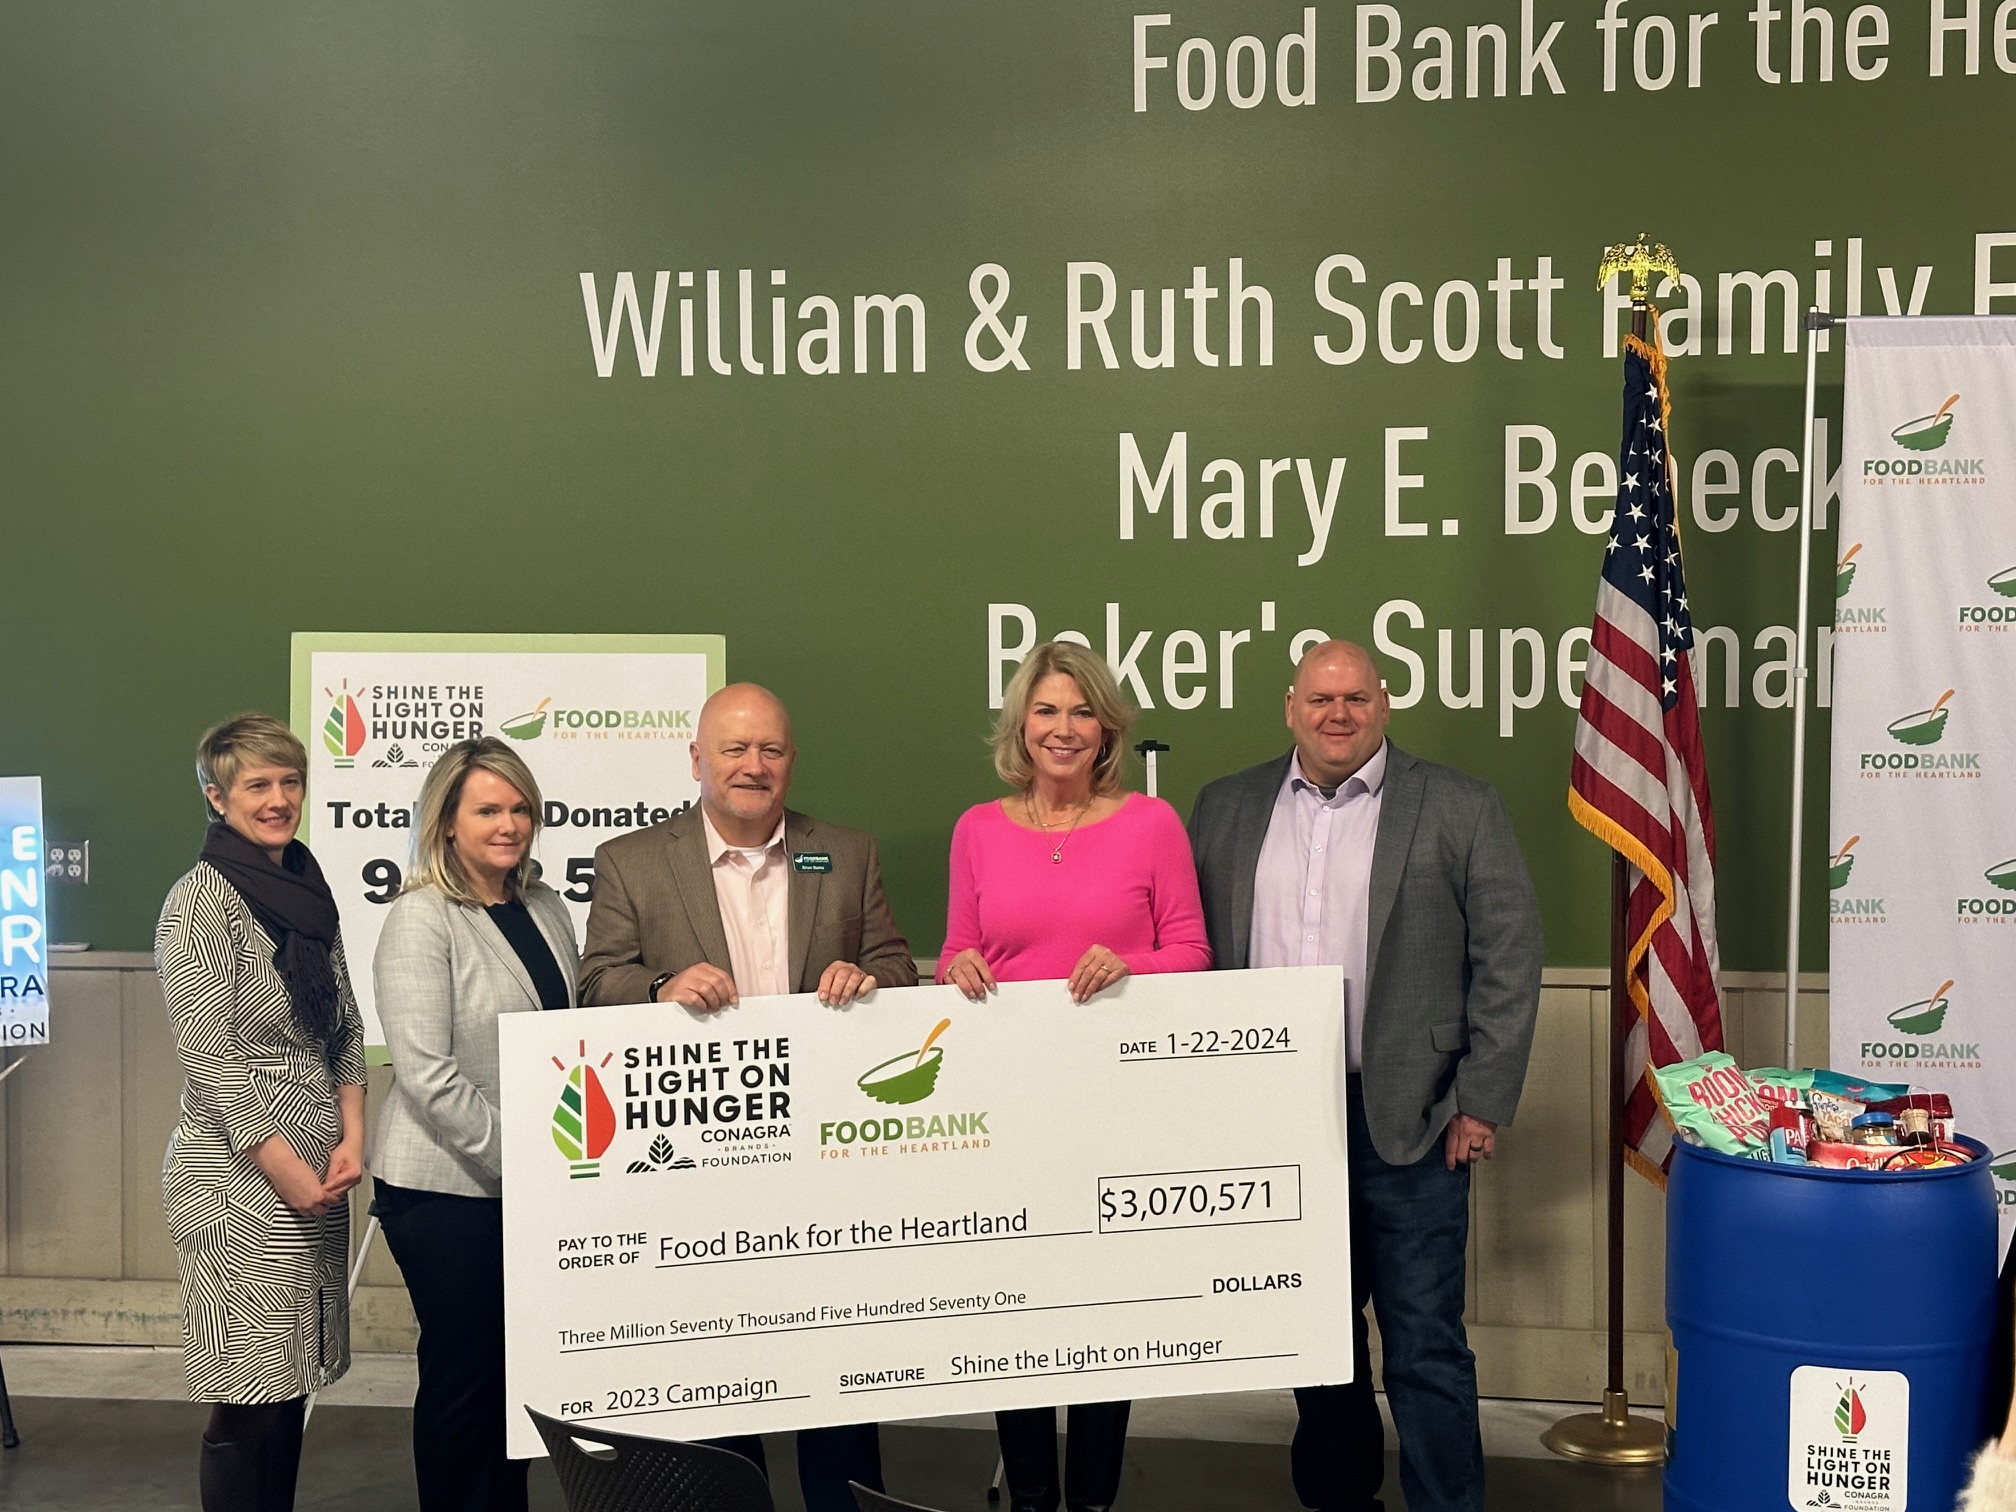 2023 Shine the Light on Hunger Campaign Exceeds Goal of 5 Million Meals